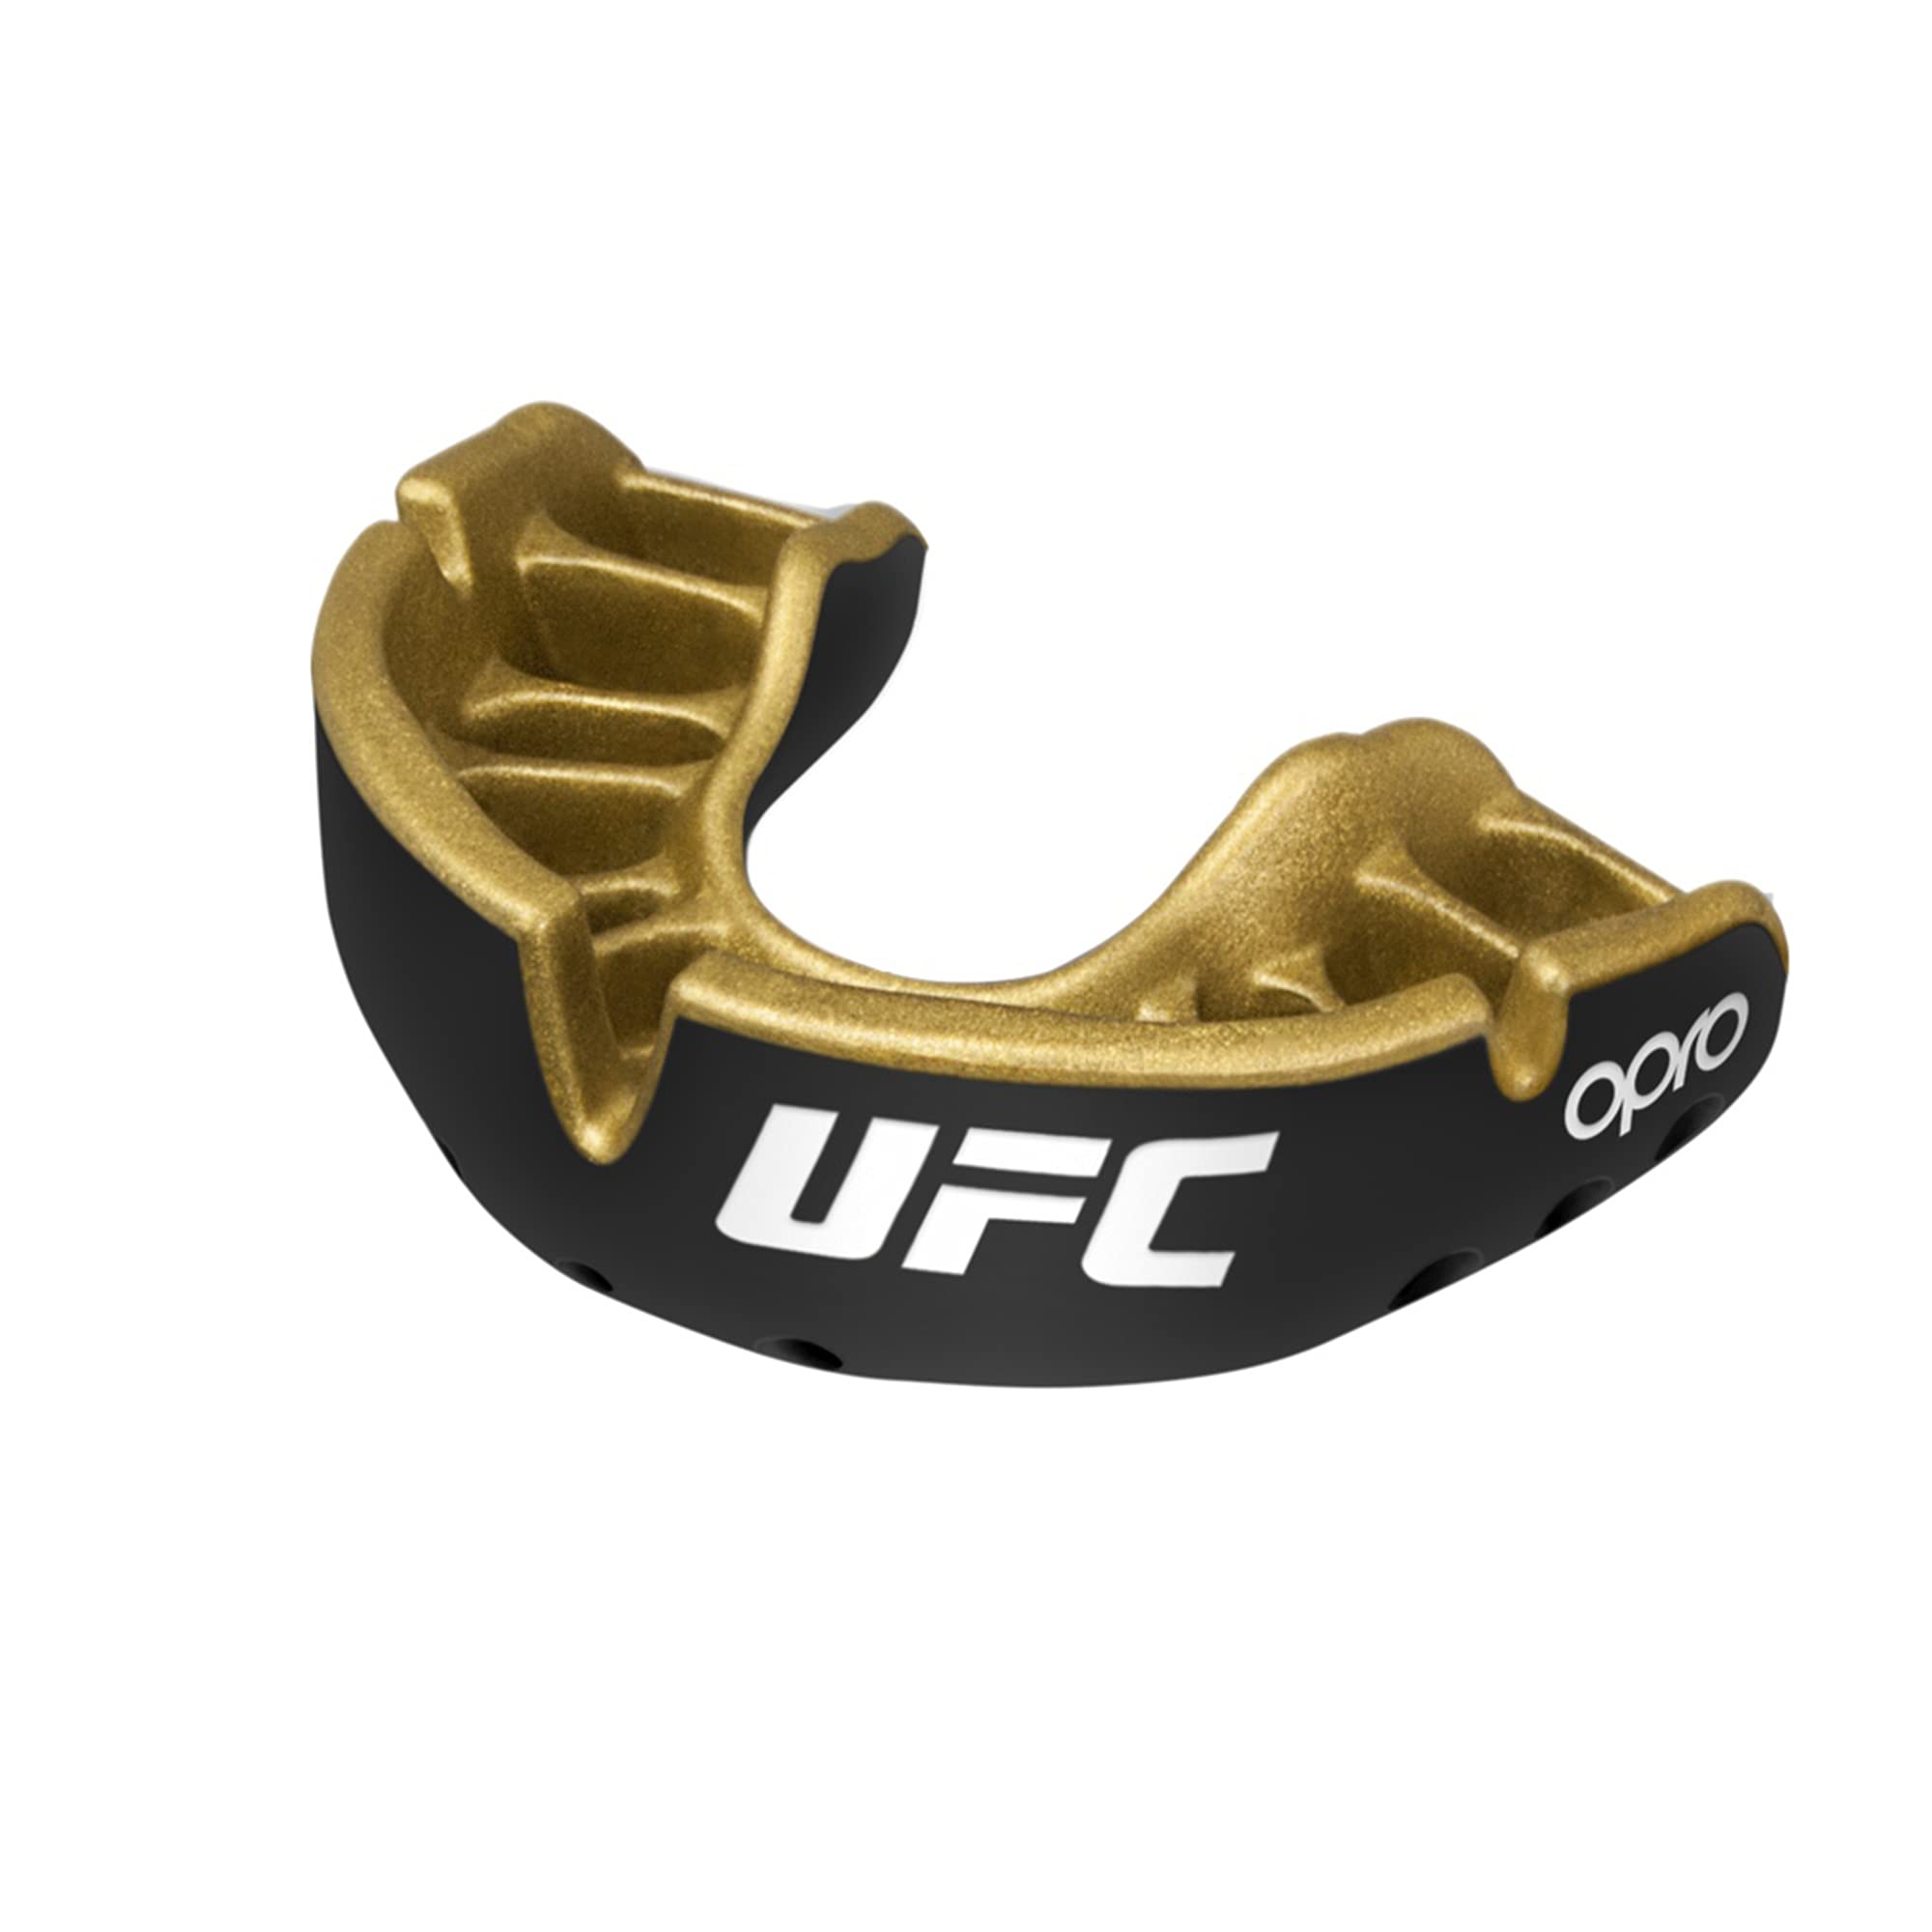 Opro Self Fit UFC Full Pack Gold Mouthguard, Black Metal/Gold